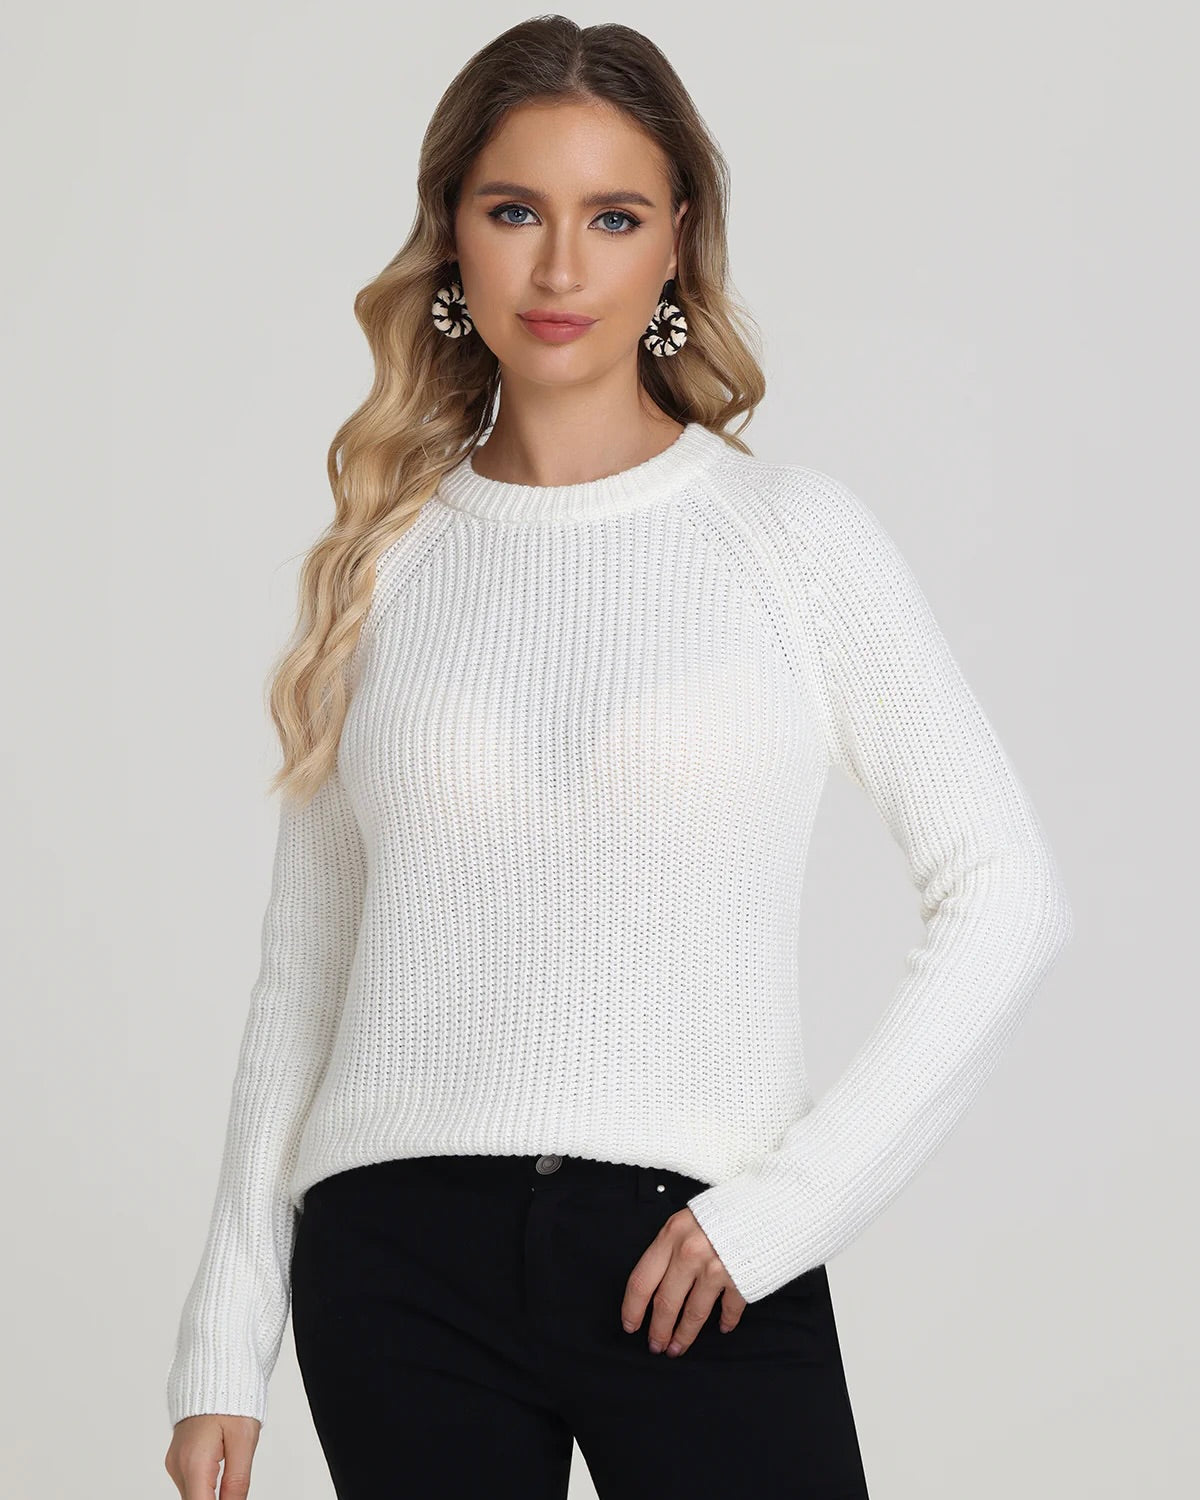 Model wearing 525 America Jane Pullover Sweater in white wearing black jeans on a white background